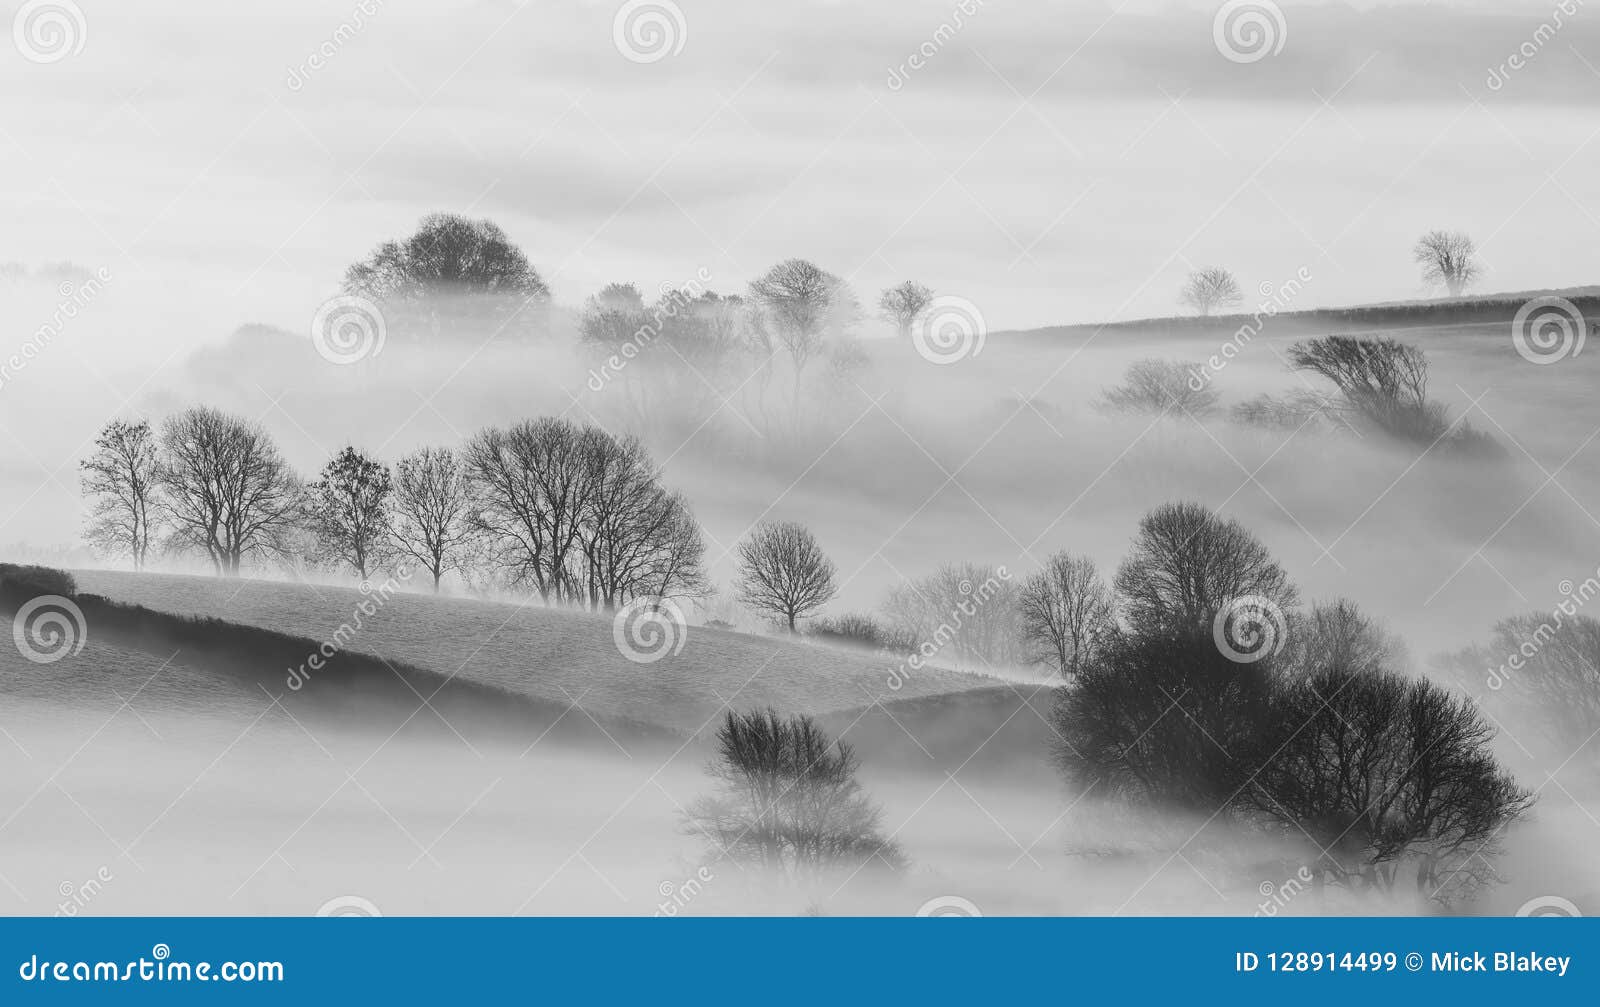 trees in mist in the beautiful cornish countryside